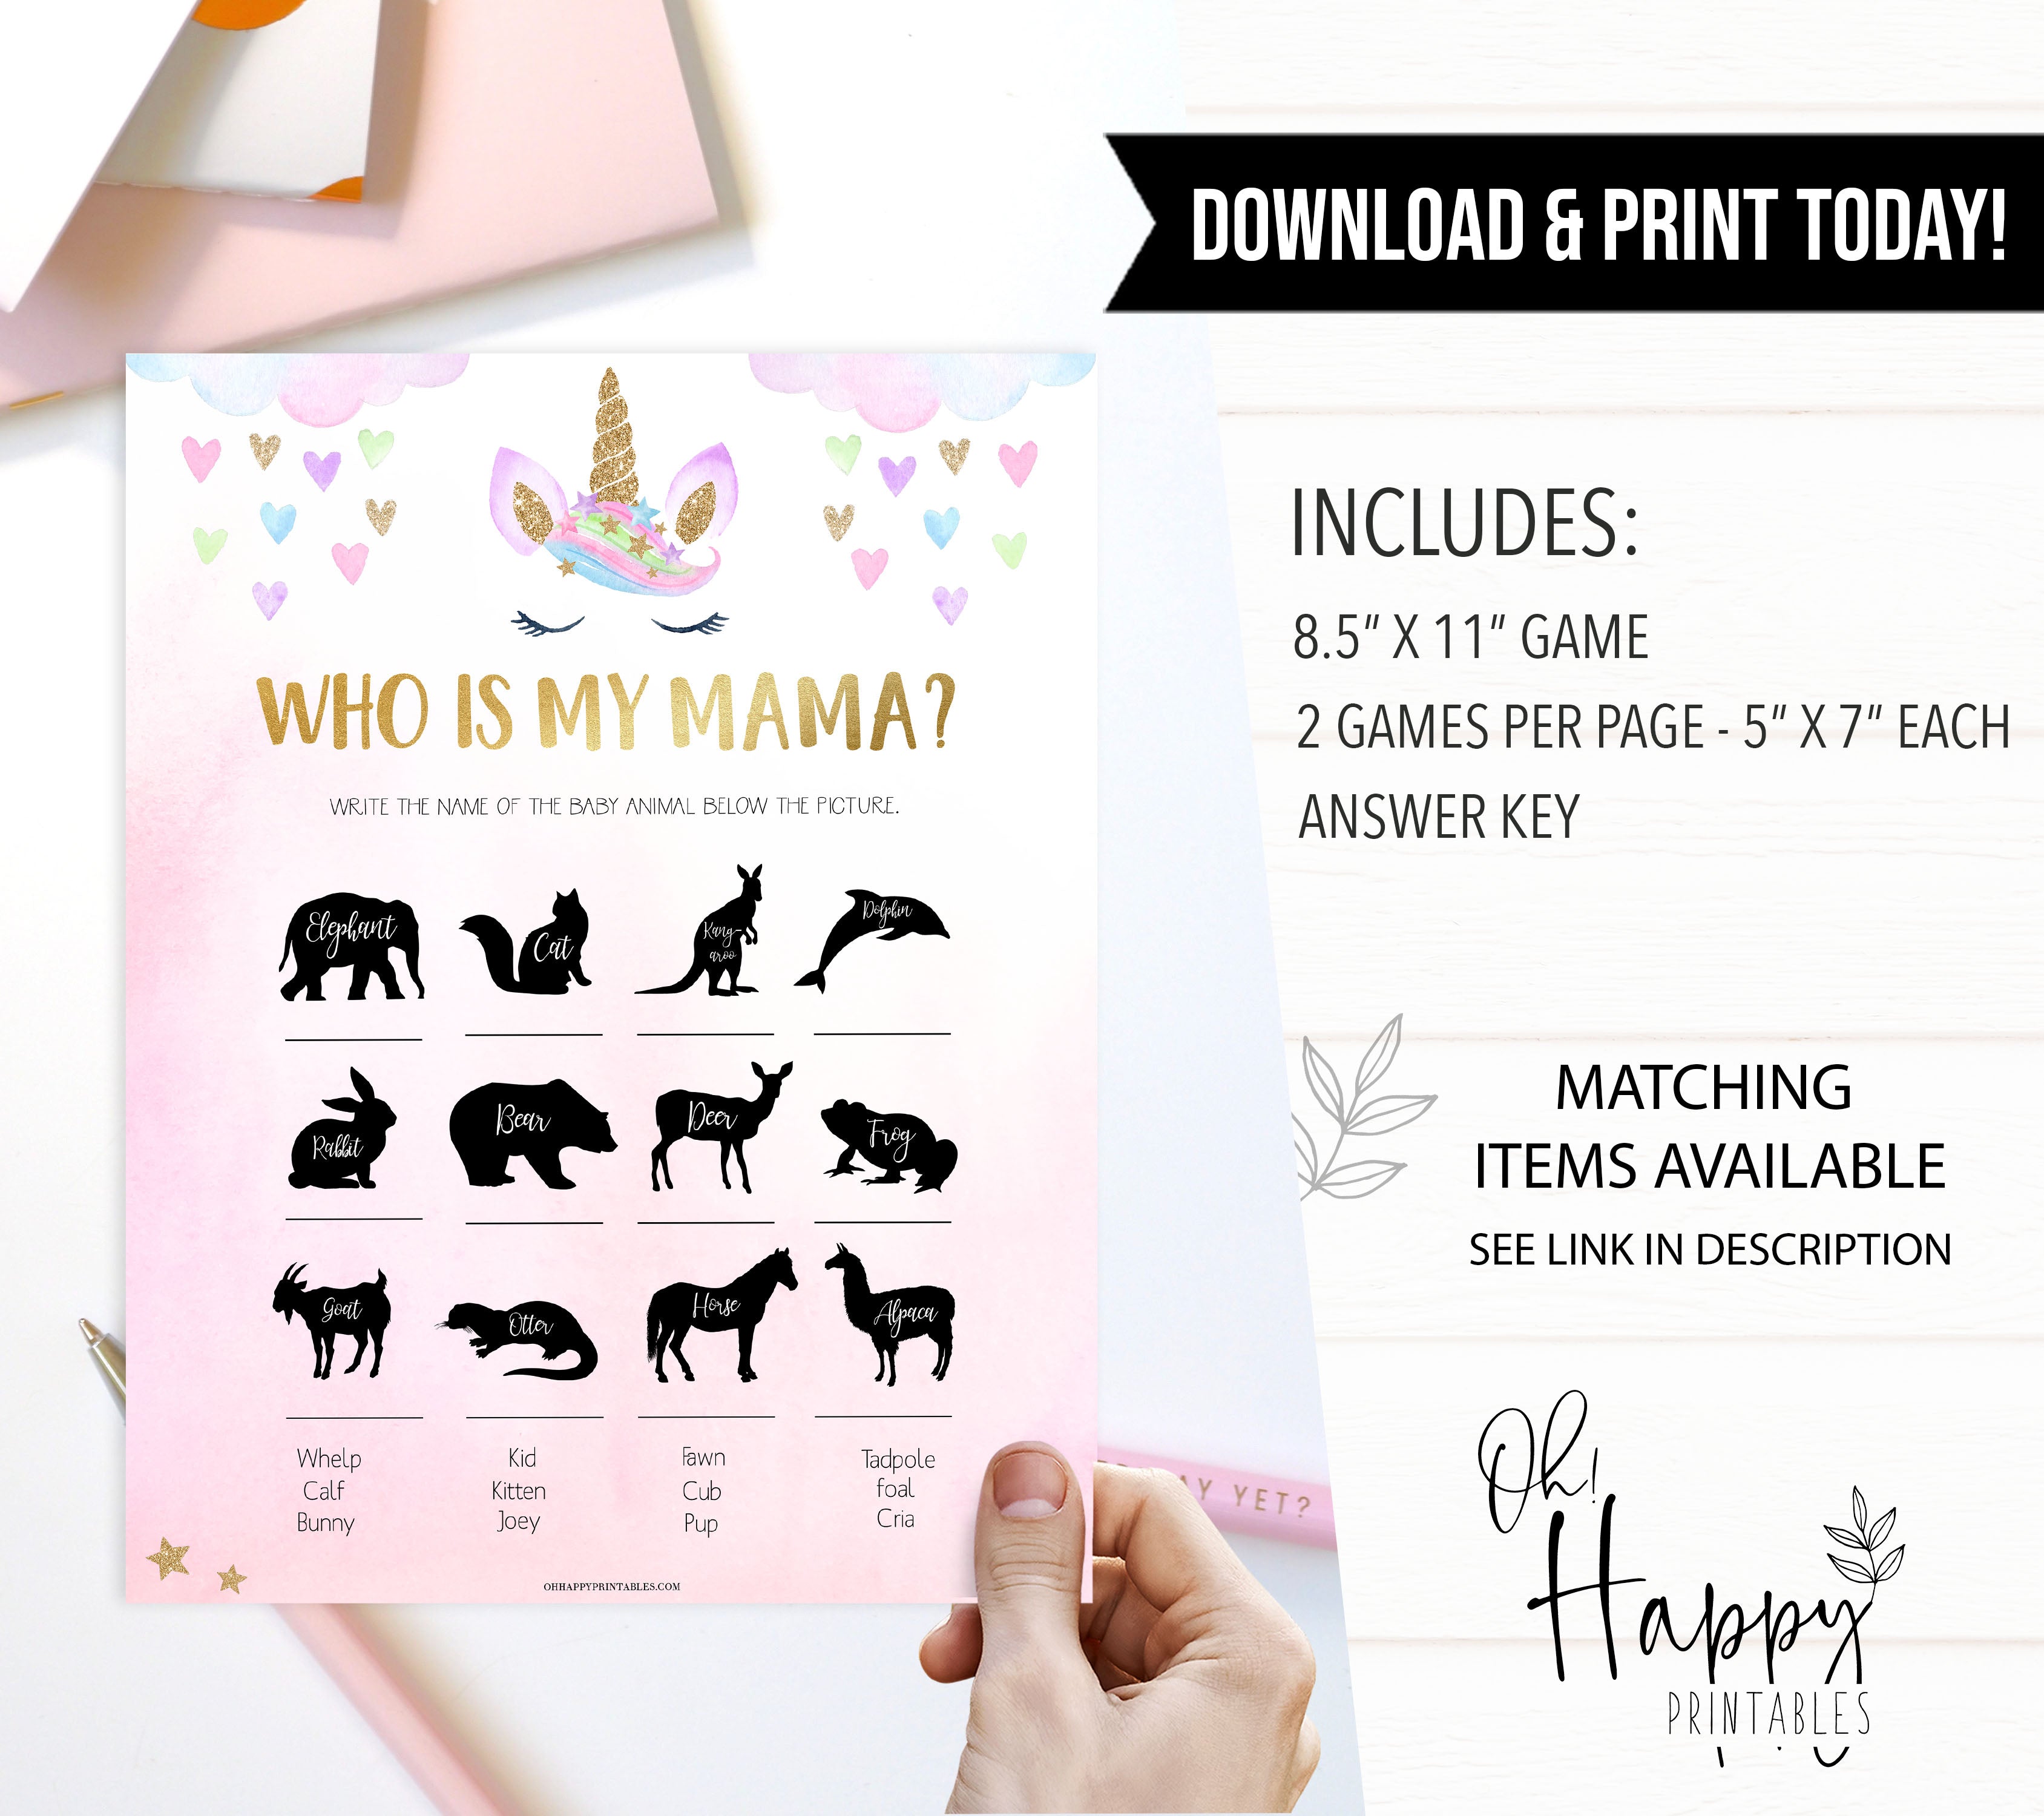 who is my mama baby game, Printable baby shower games, unicorn baby games, baby shower games, fun baby shower ideas, top baby shower ideas, unicorn baby shower, baby shower games, fun unicorn baby shower ideas